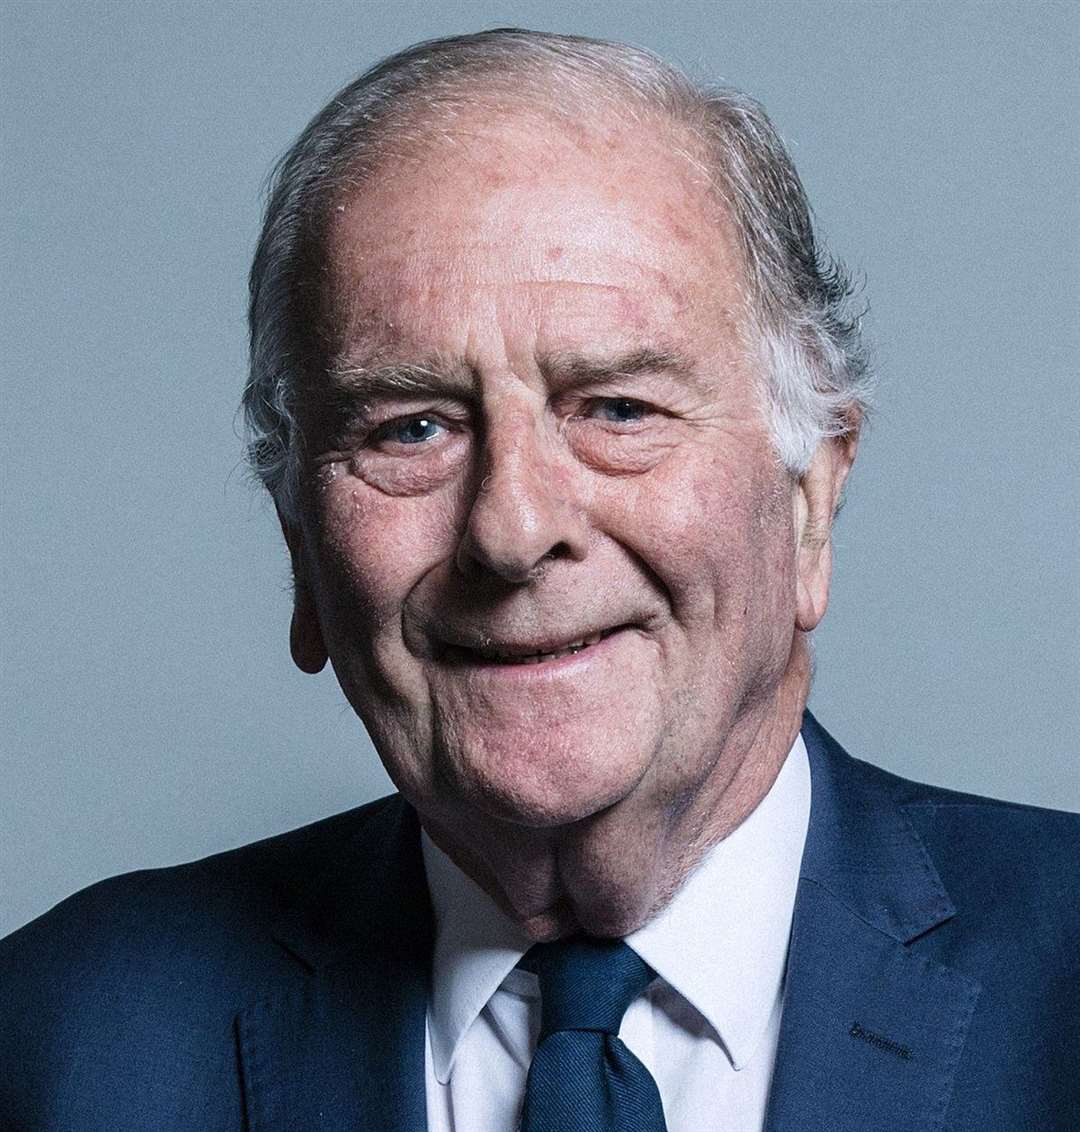 Thanet MP Sir Roger Gale. Picture: UK Parliament official portraits